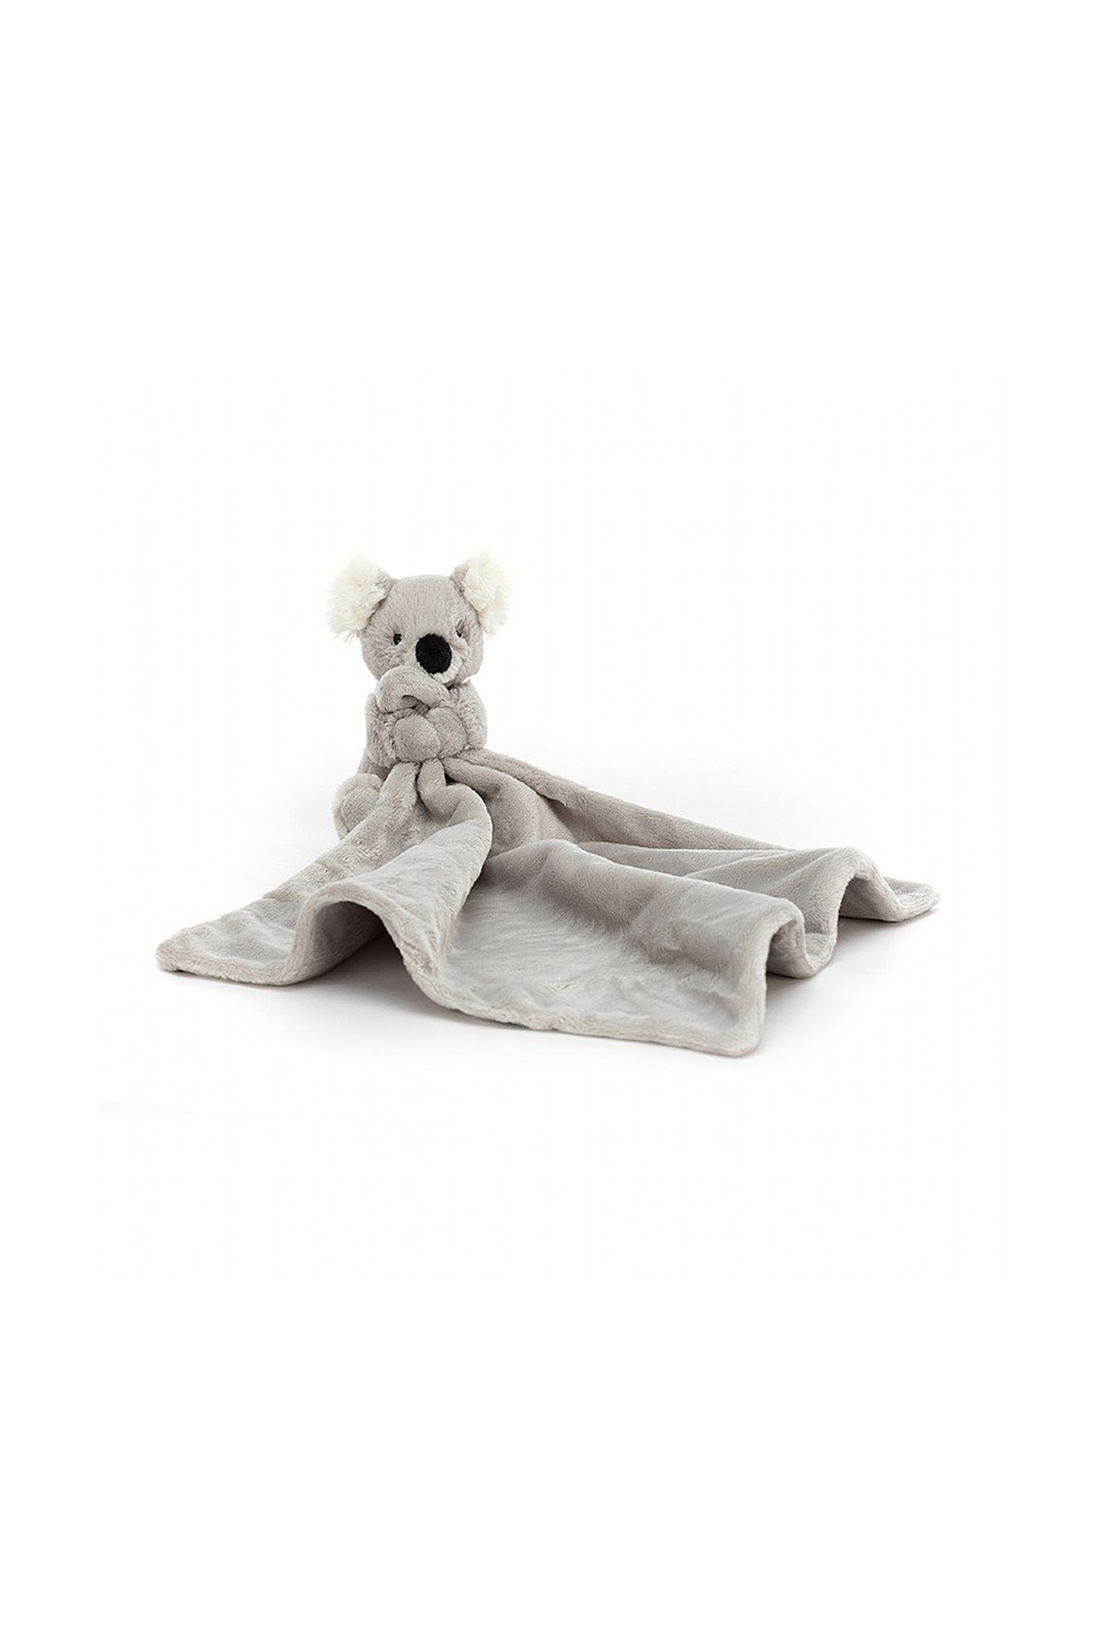 Personalisable Jellycat Snugglet Koala Soother - Sea Apple